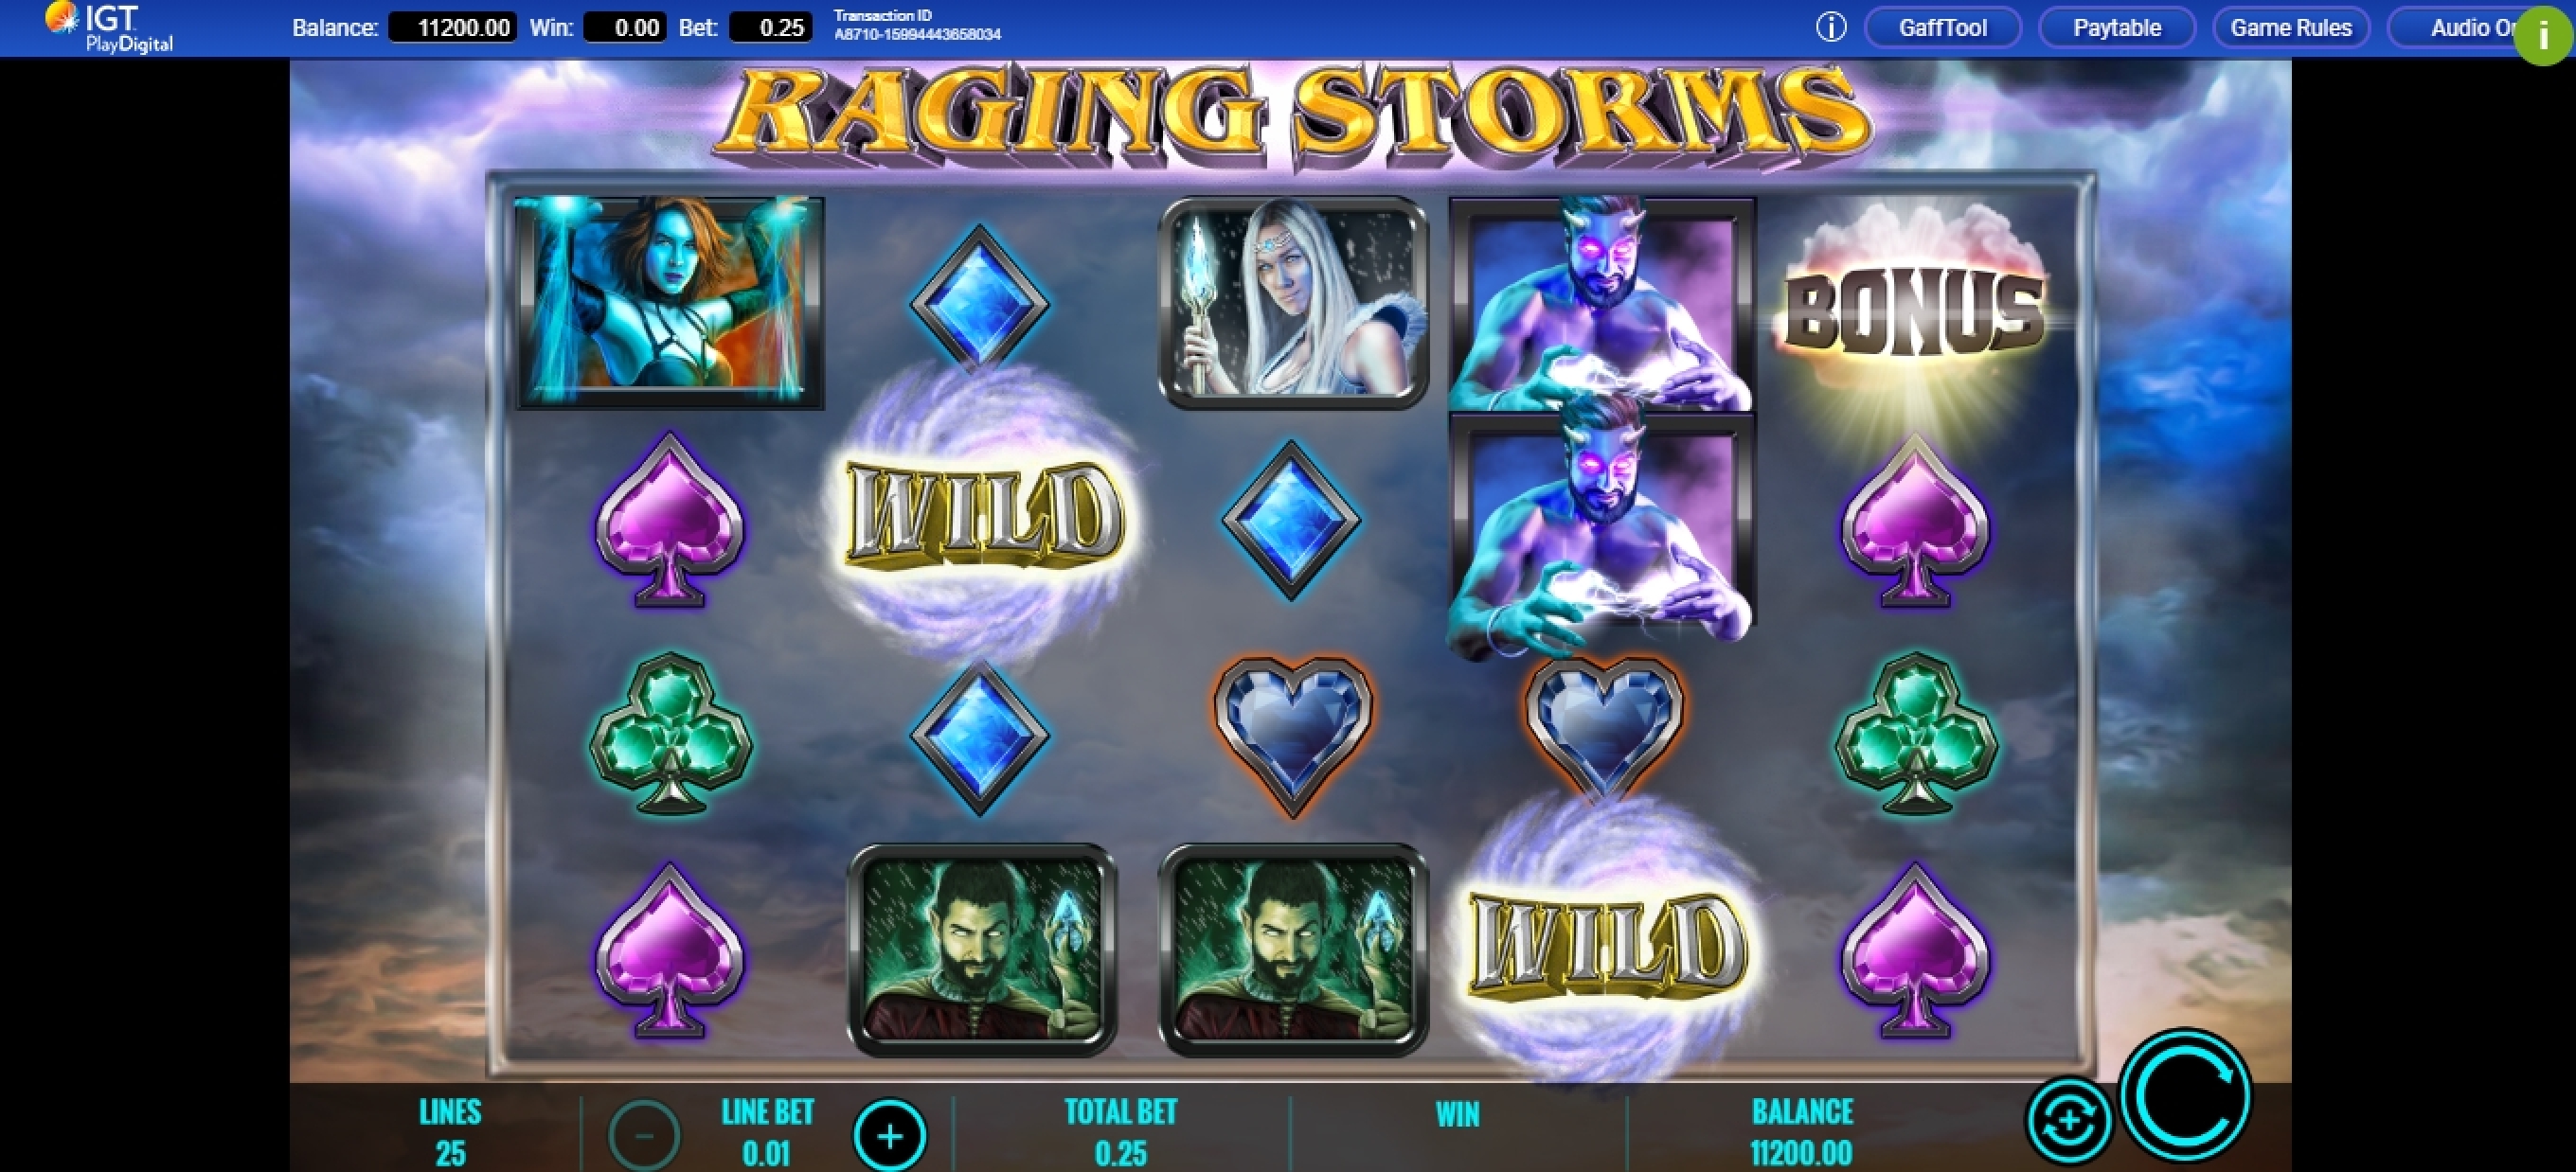 Reels in Raging Storms Slot Game by IGT